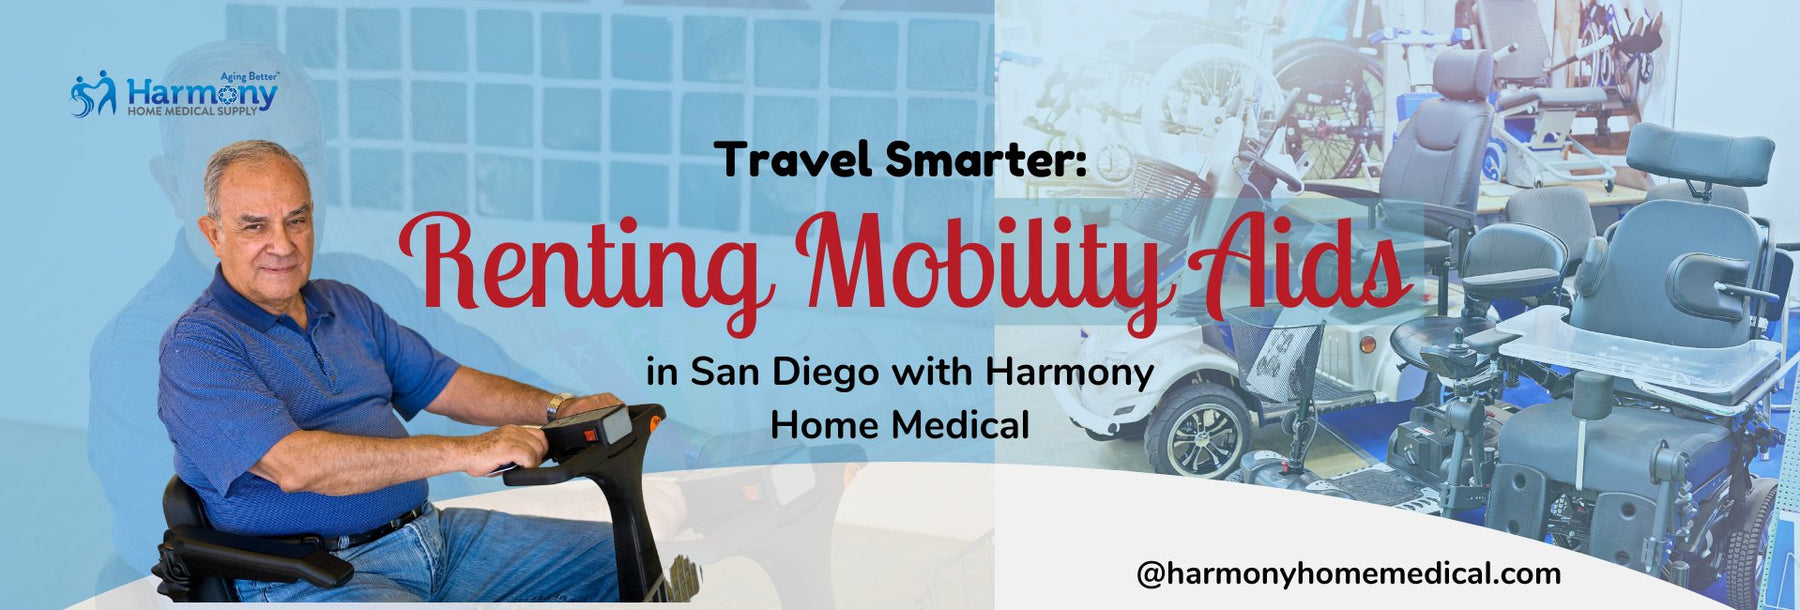 Travel Smarter: Renting Mobility Aids in San Diego with Harmony Home Medical - Harmony Home Medical Supply